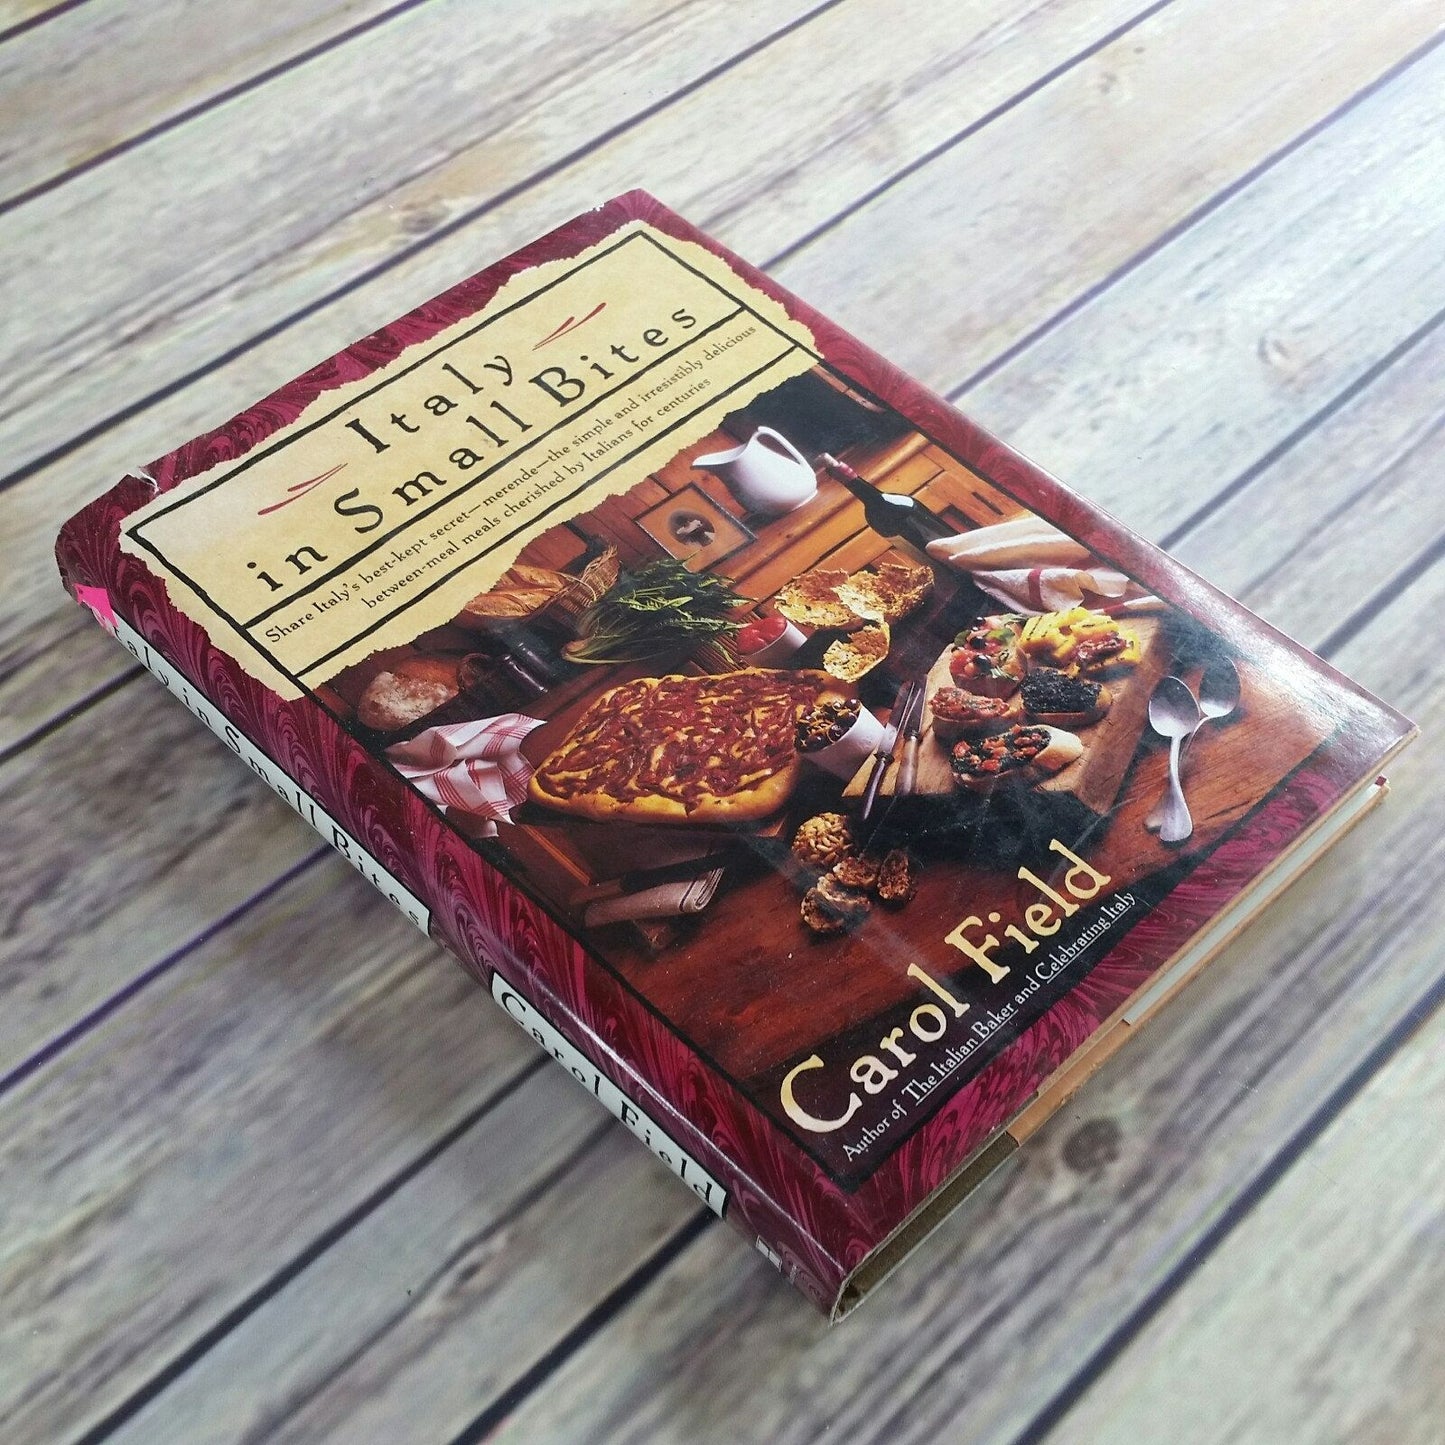 Vintage Italian Cooking Cookbook Italy in Small Bites Carol Field 1993 Hardcover Recipes WITH Dust Jacket Between Meal Meals Merende